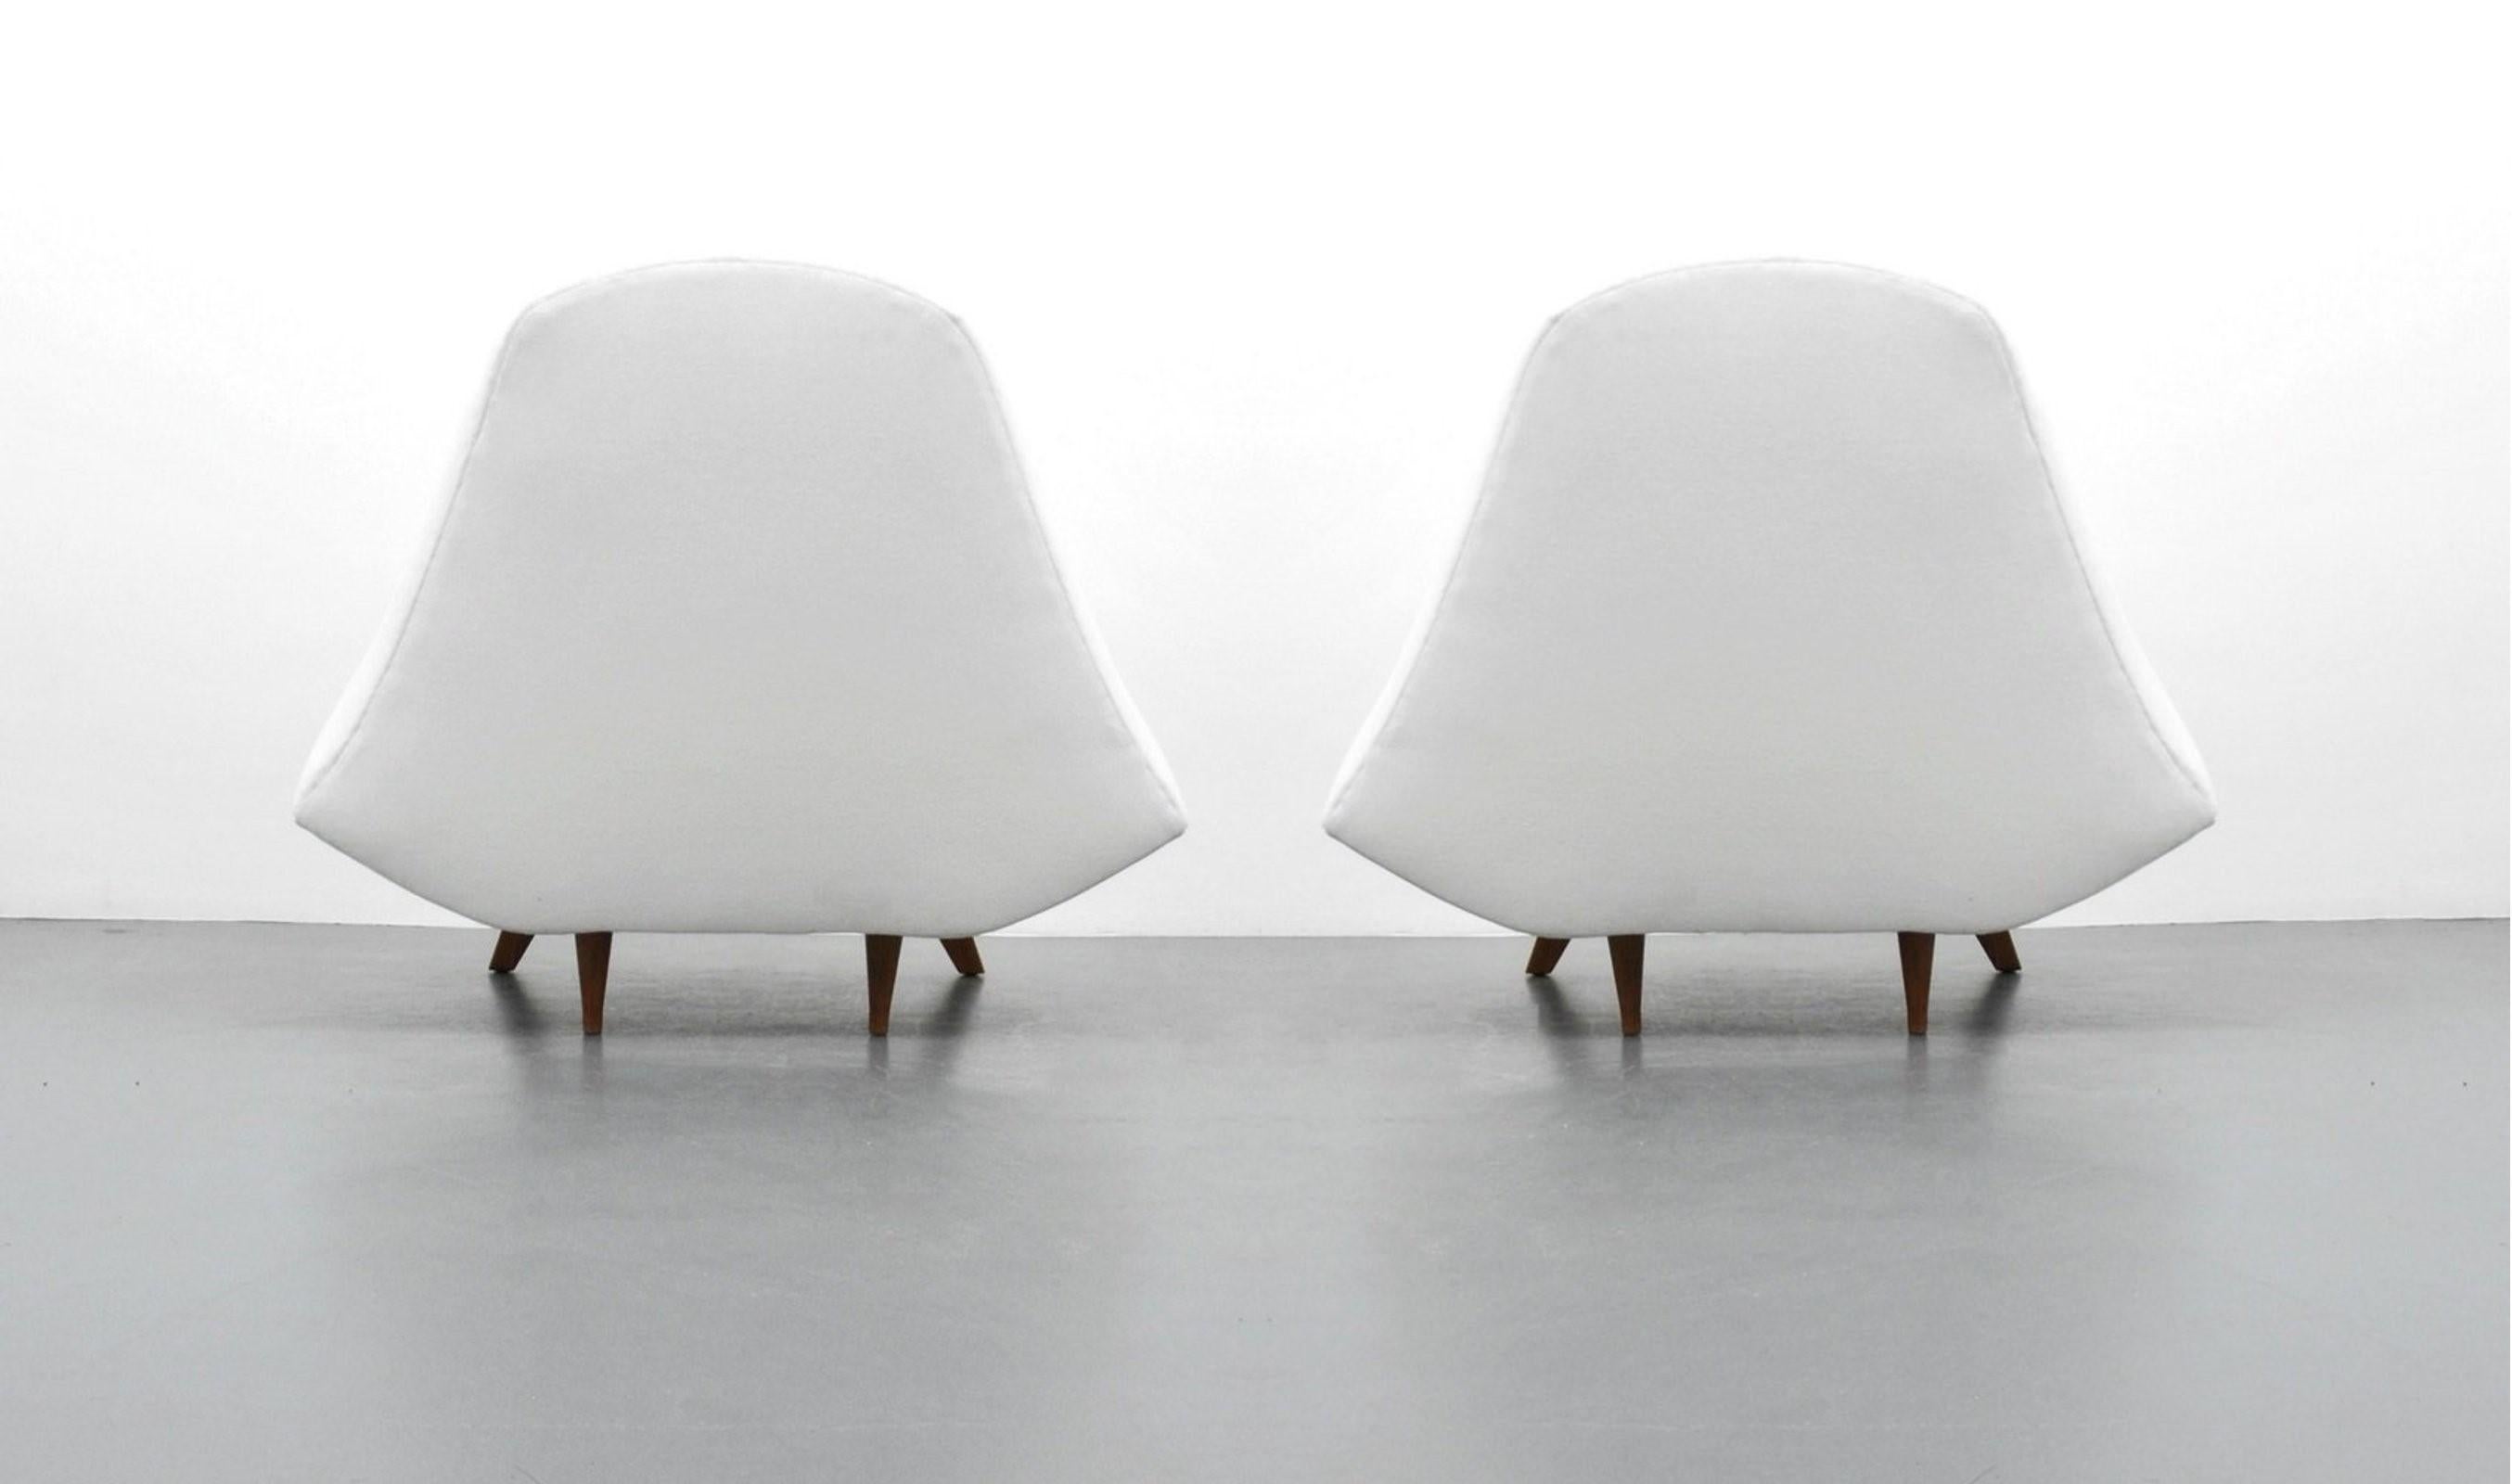 Mid-20th Century Adrian Pearsall 'Gondola' Button-Tufted Chairs for Craft Associates For Sale